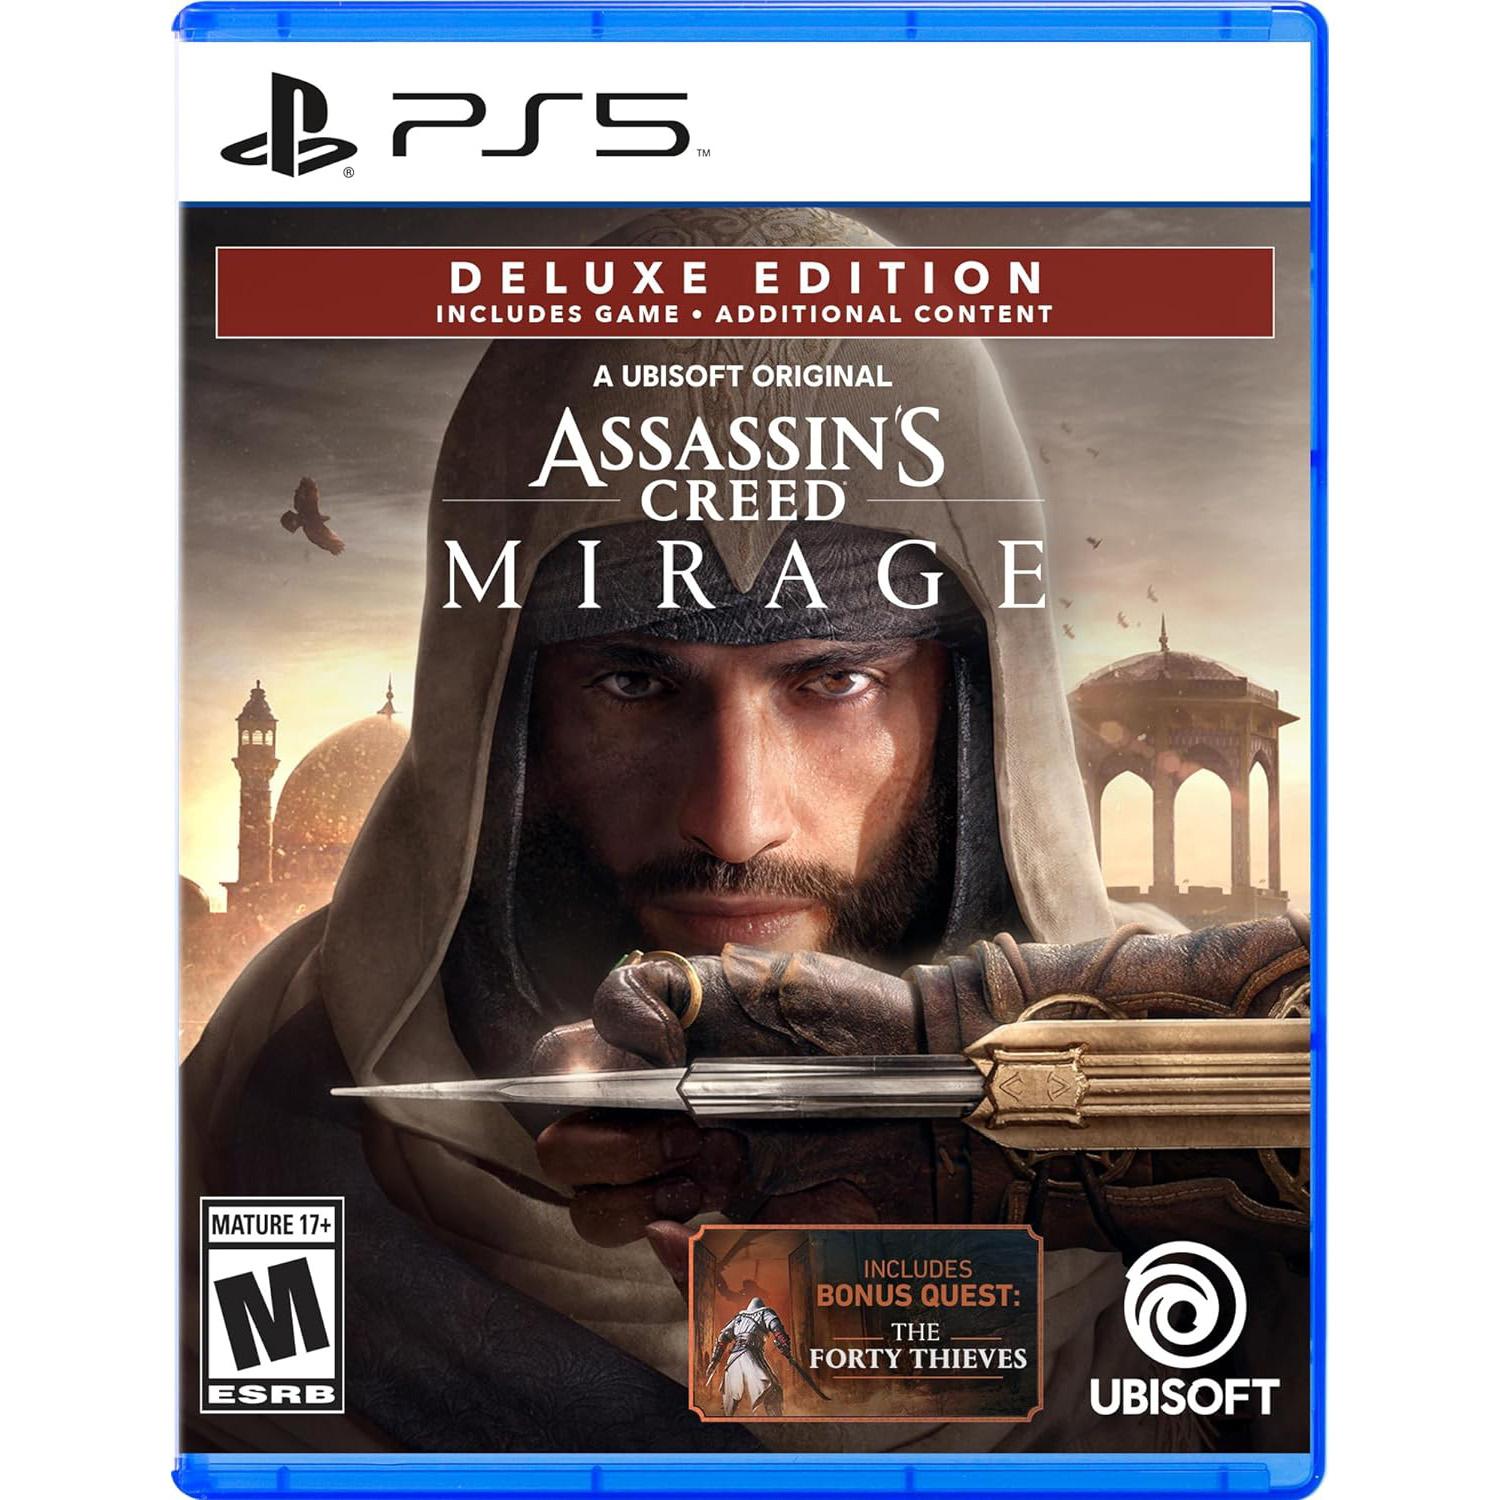 Assassin's Creed Origins For PS4, Xbox One, PC